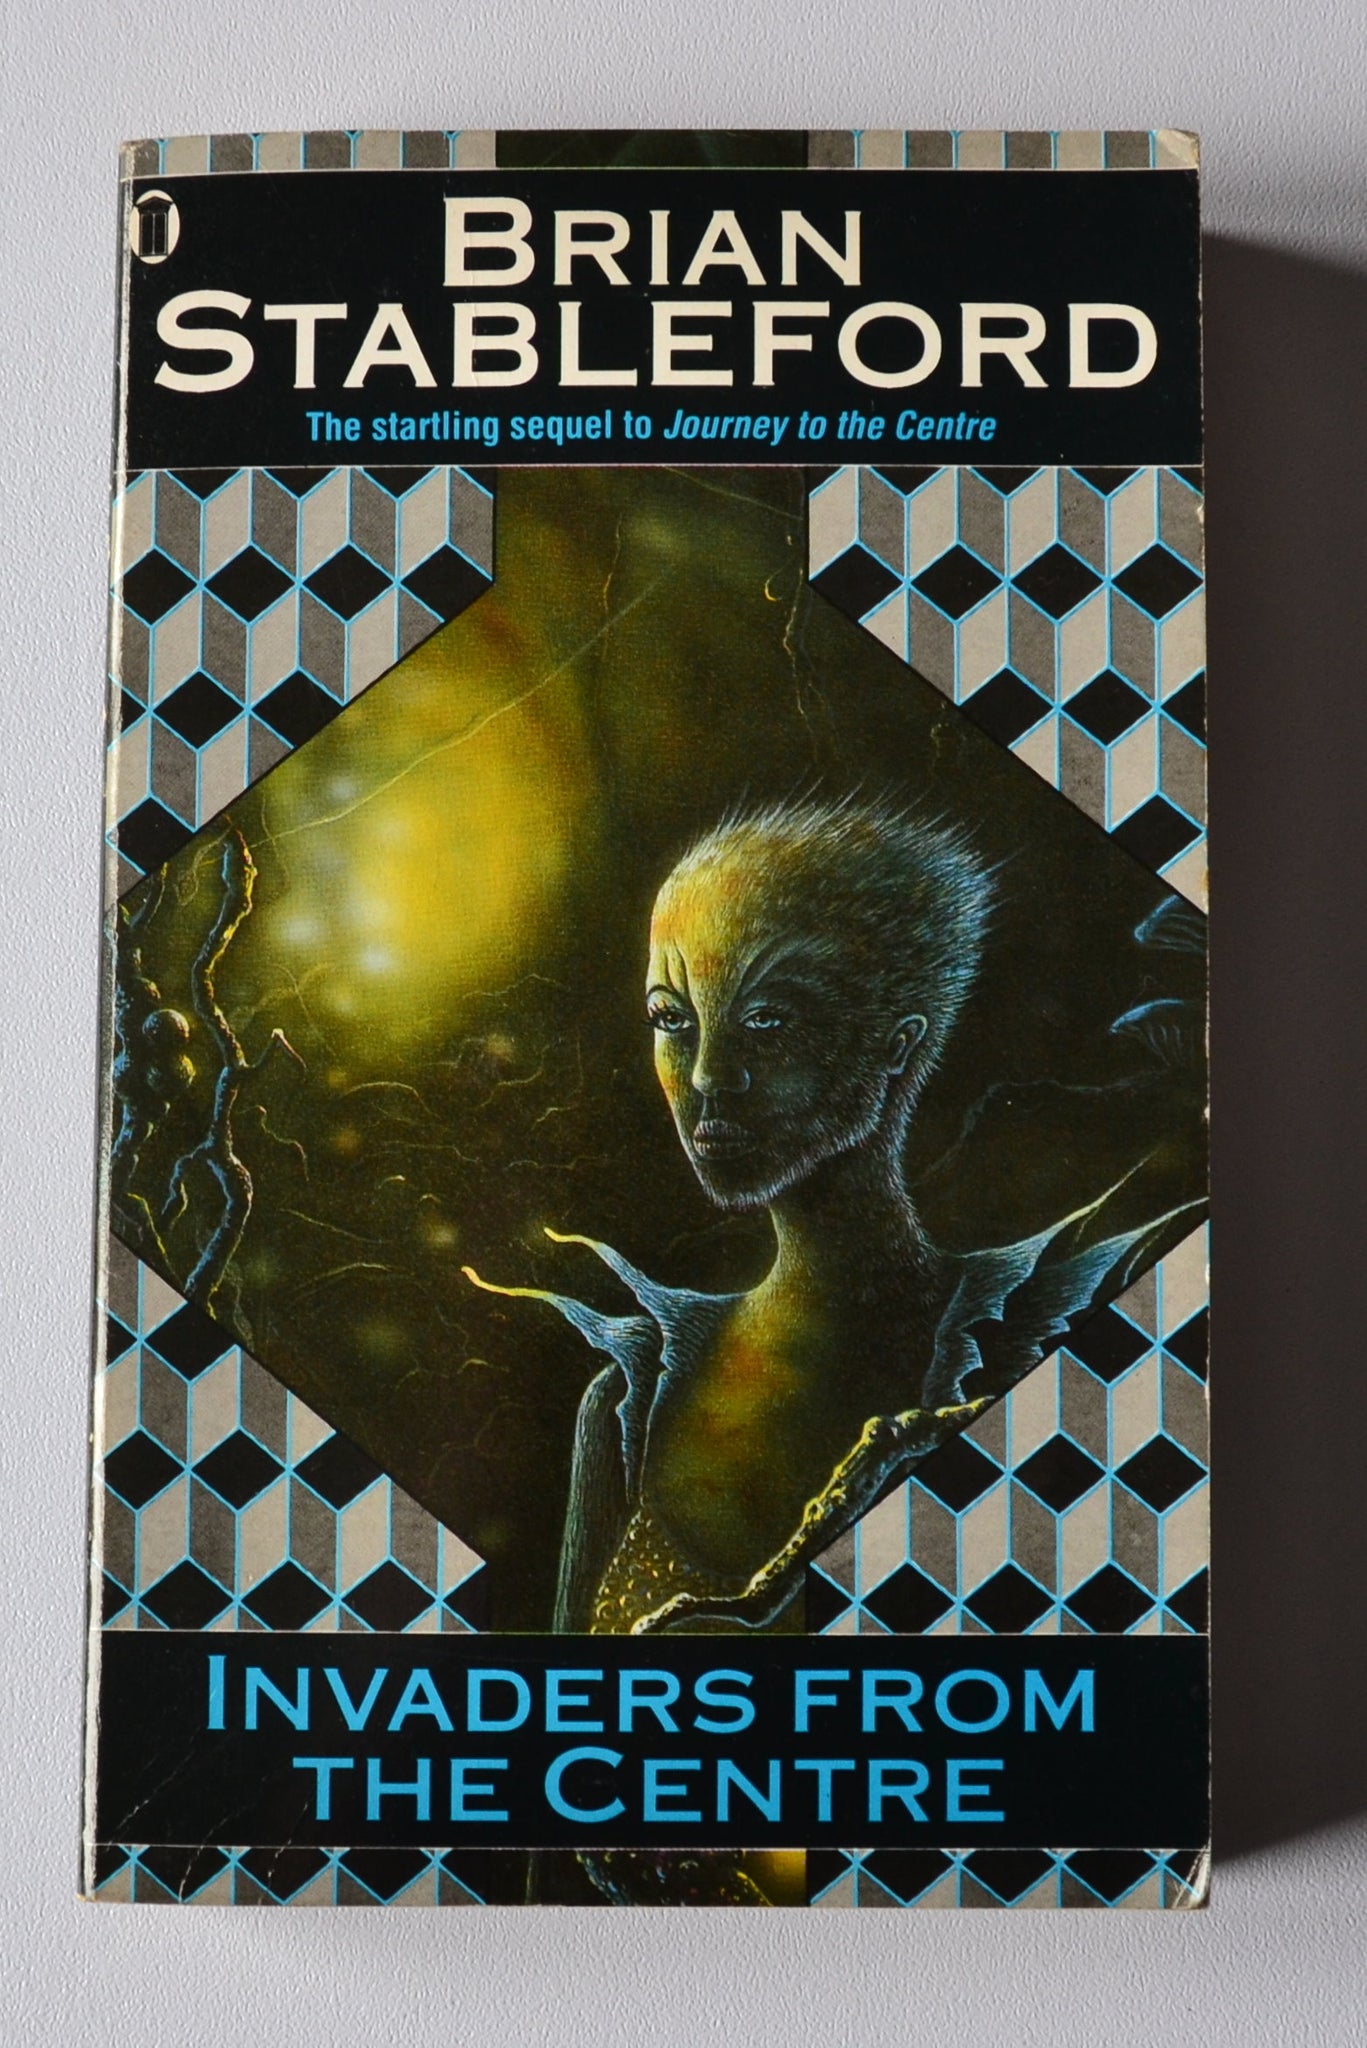 Invaders from the Centre - Asgard book 2